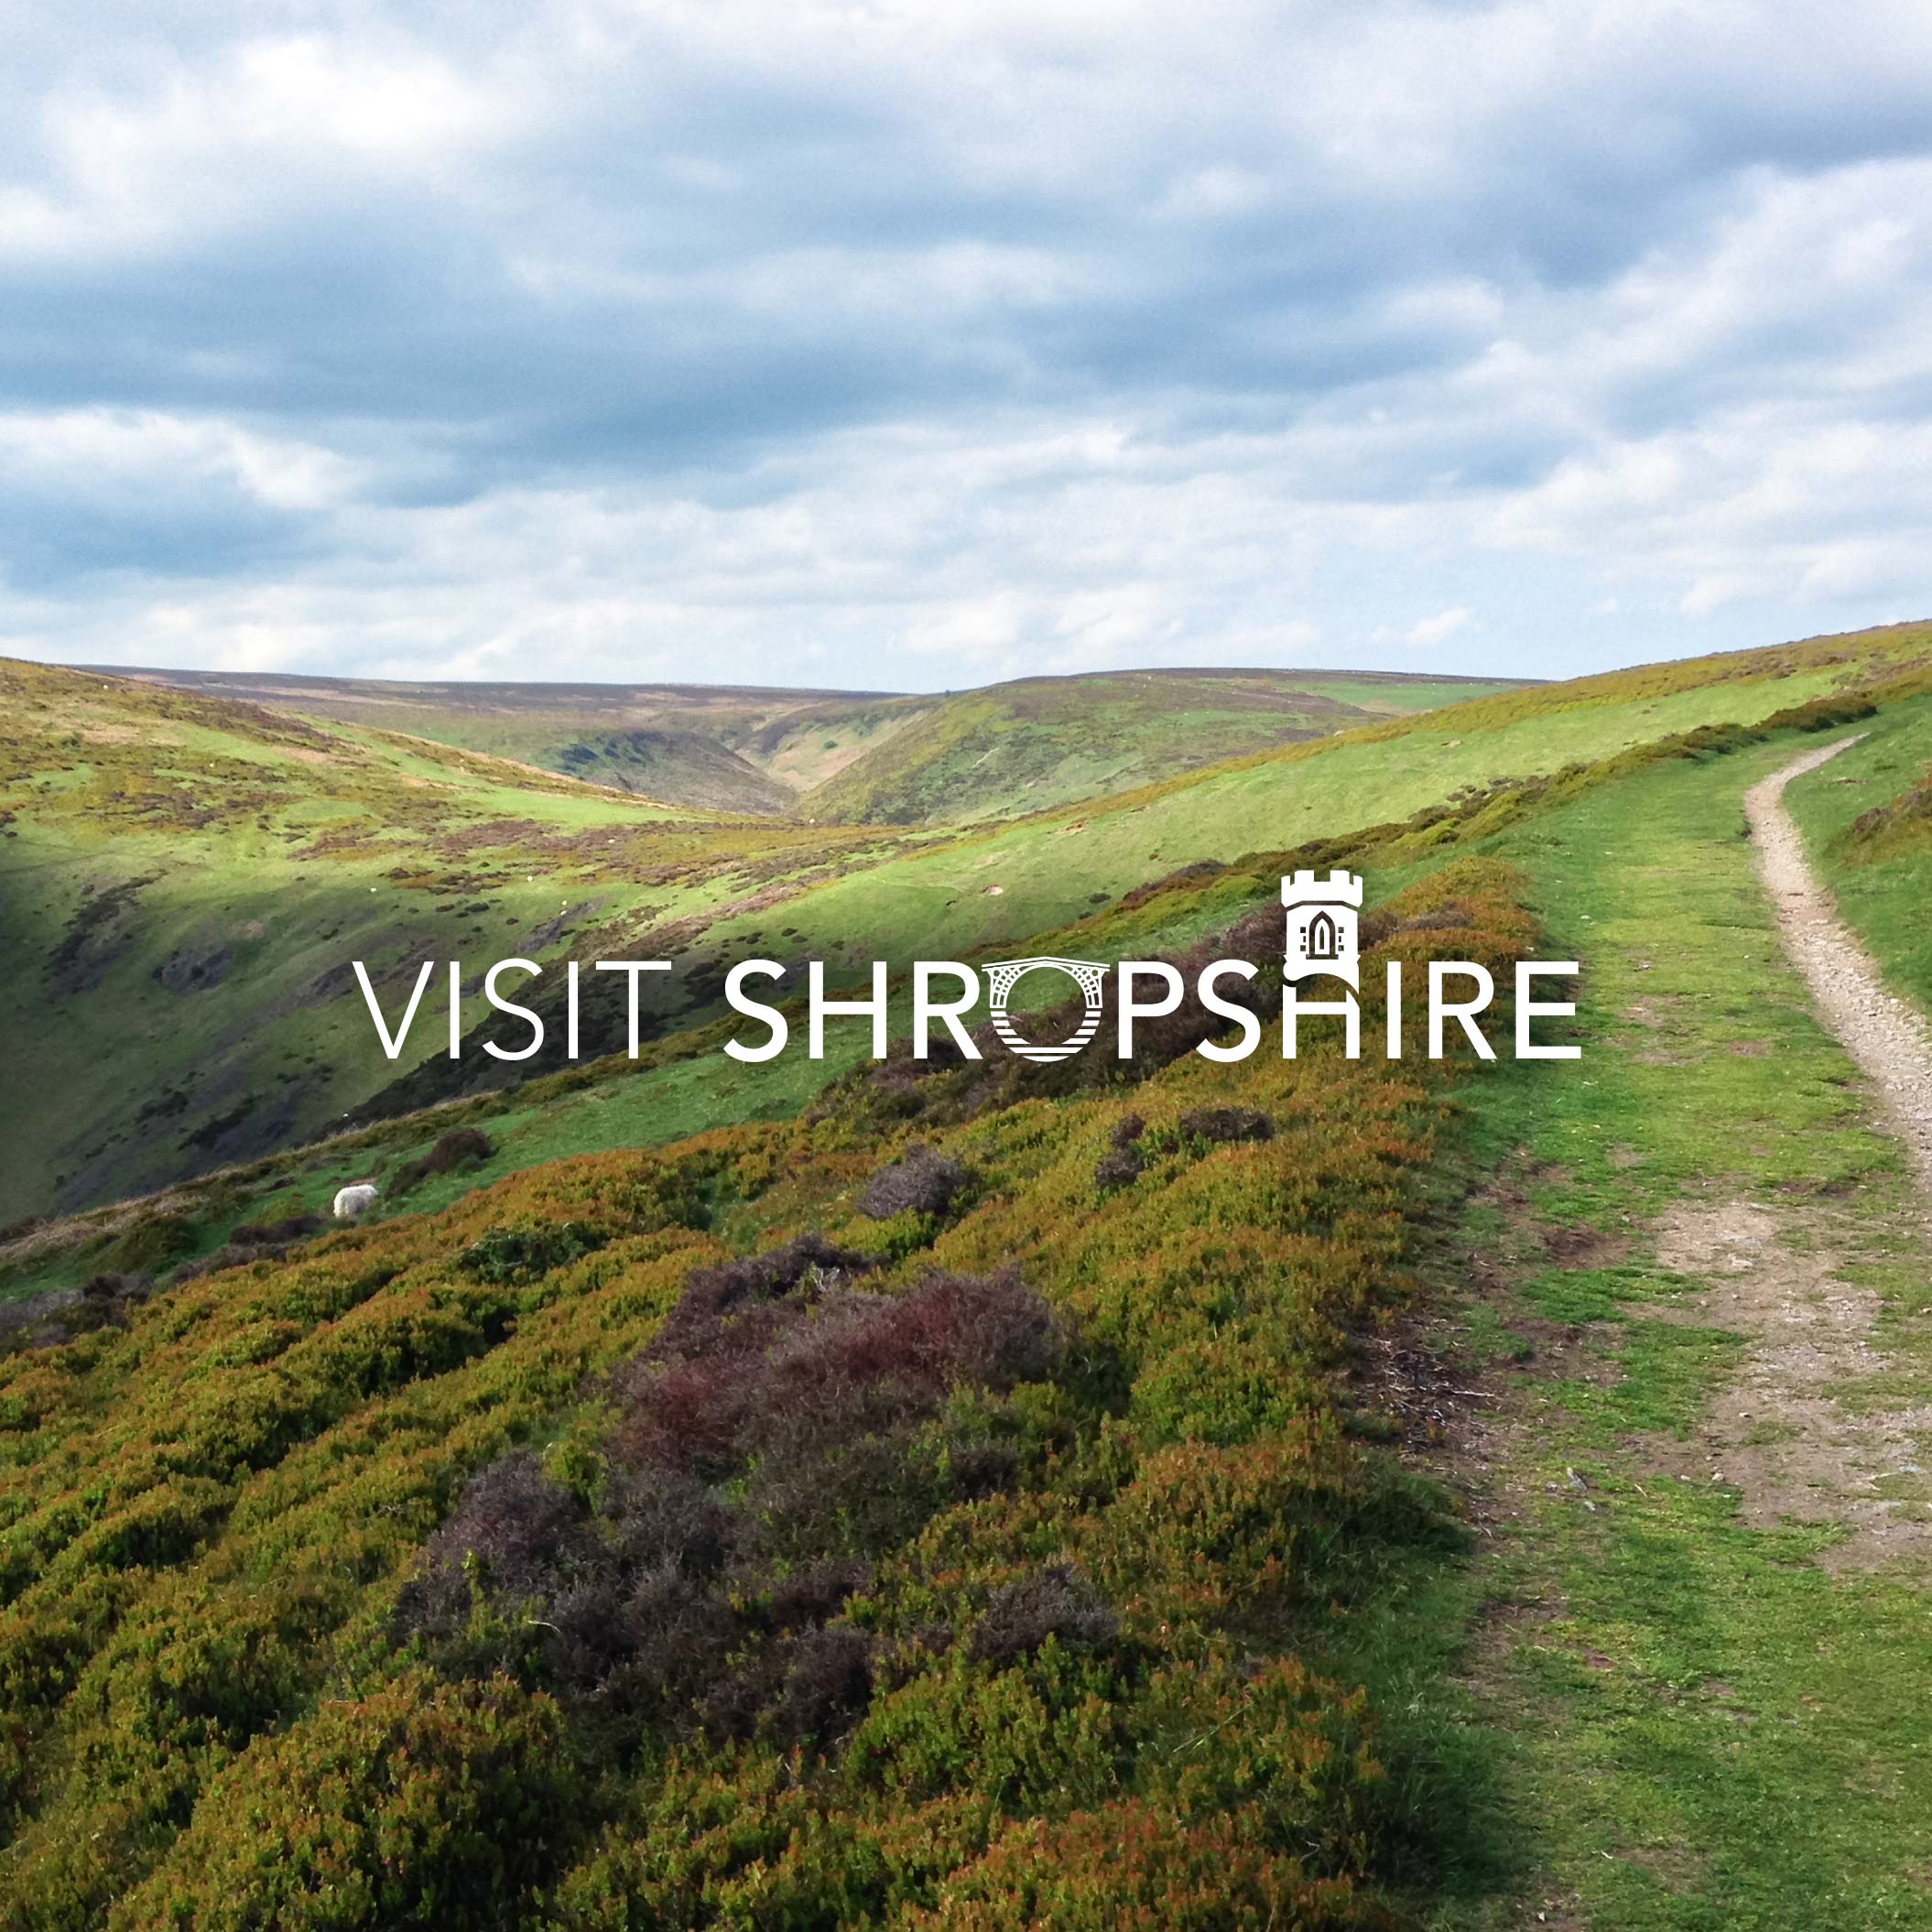 Reech win competitive tender to rebrand Shropshire Tourism